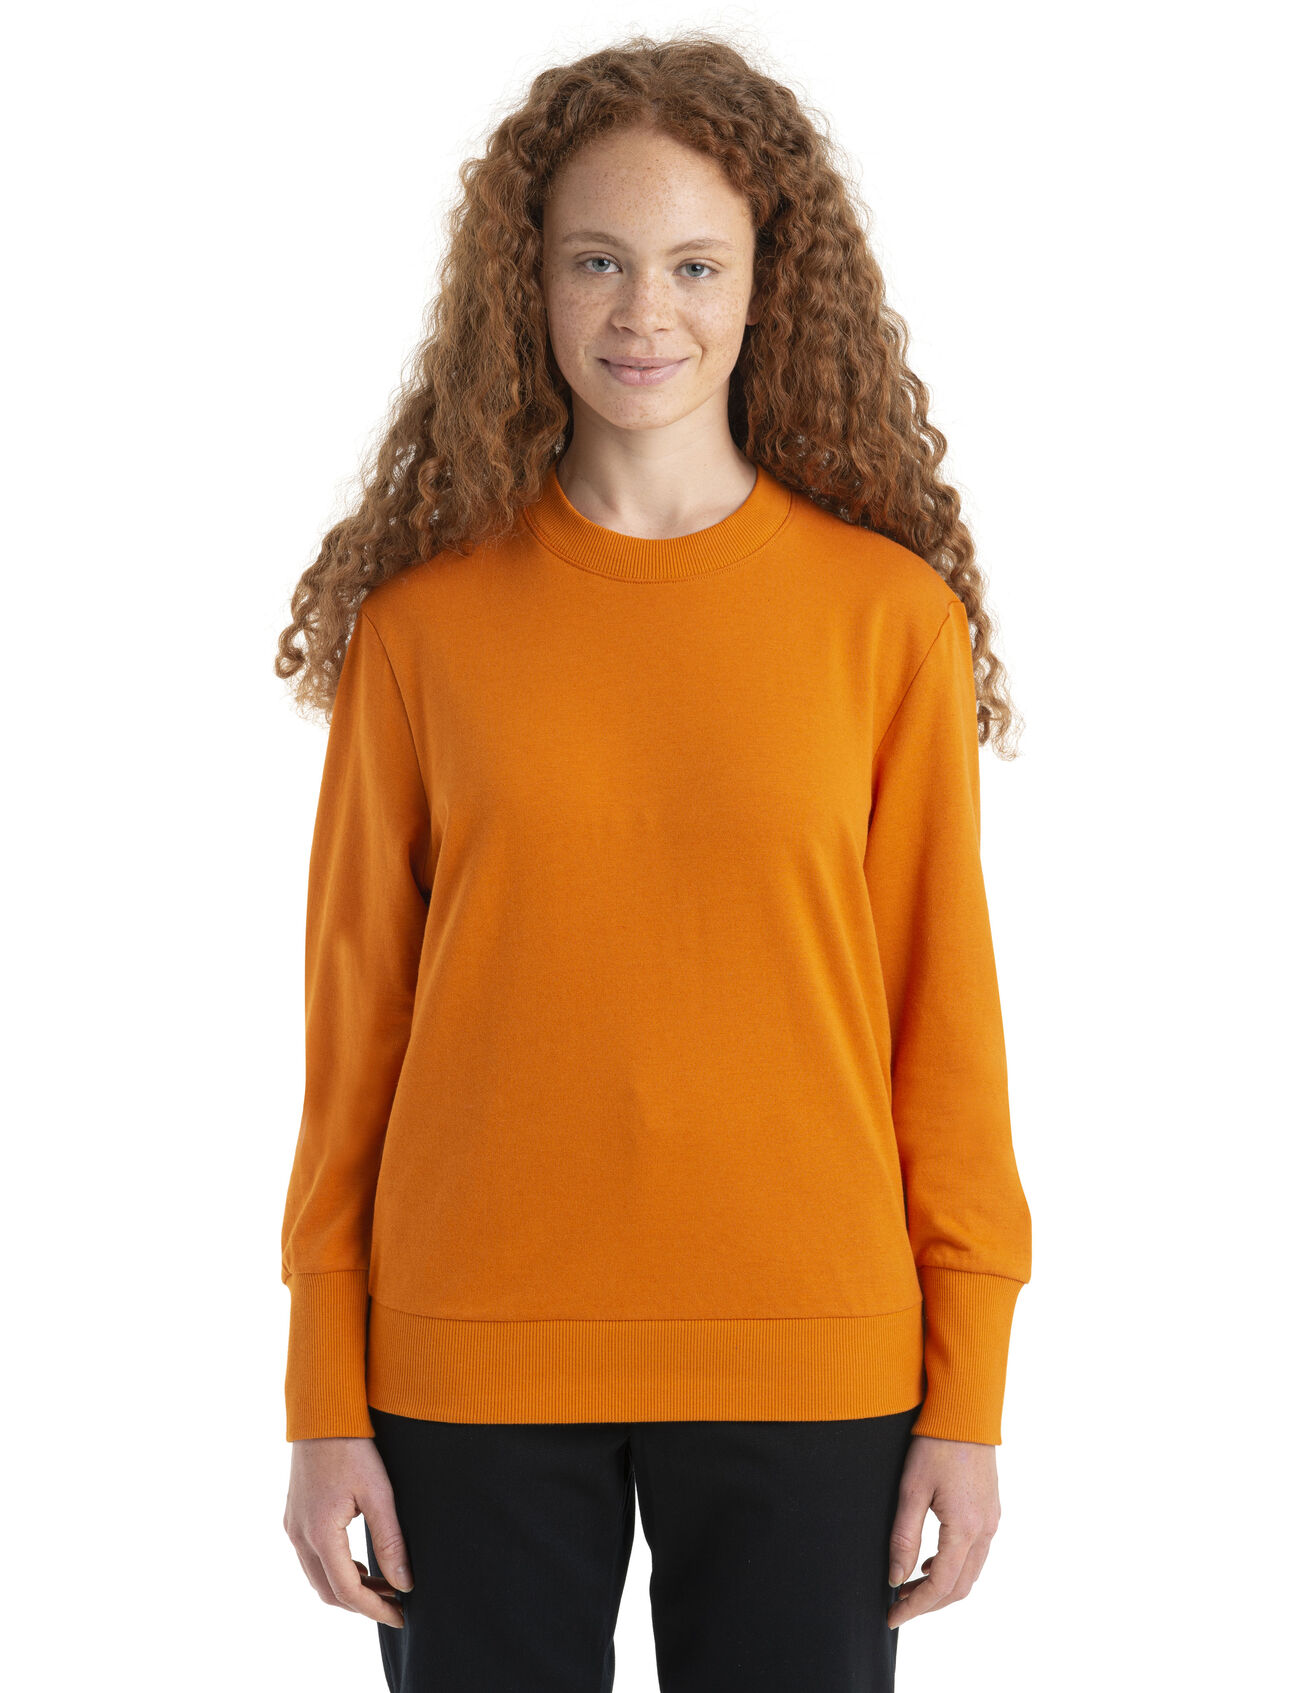 Womens Merino Central II Long Sleeve Sweatshirt A versatile, everyday pullover that goes anywhere in comfort, the Central II Long Sleeve Sweatshirt features a sustainable blend of natural merino wool and soft organically grown cotton. 